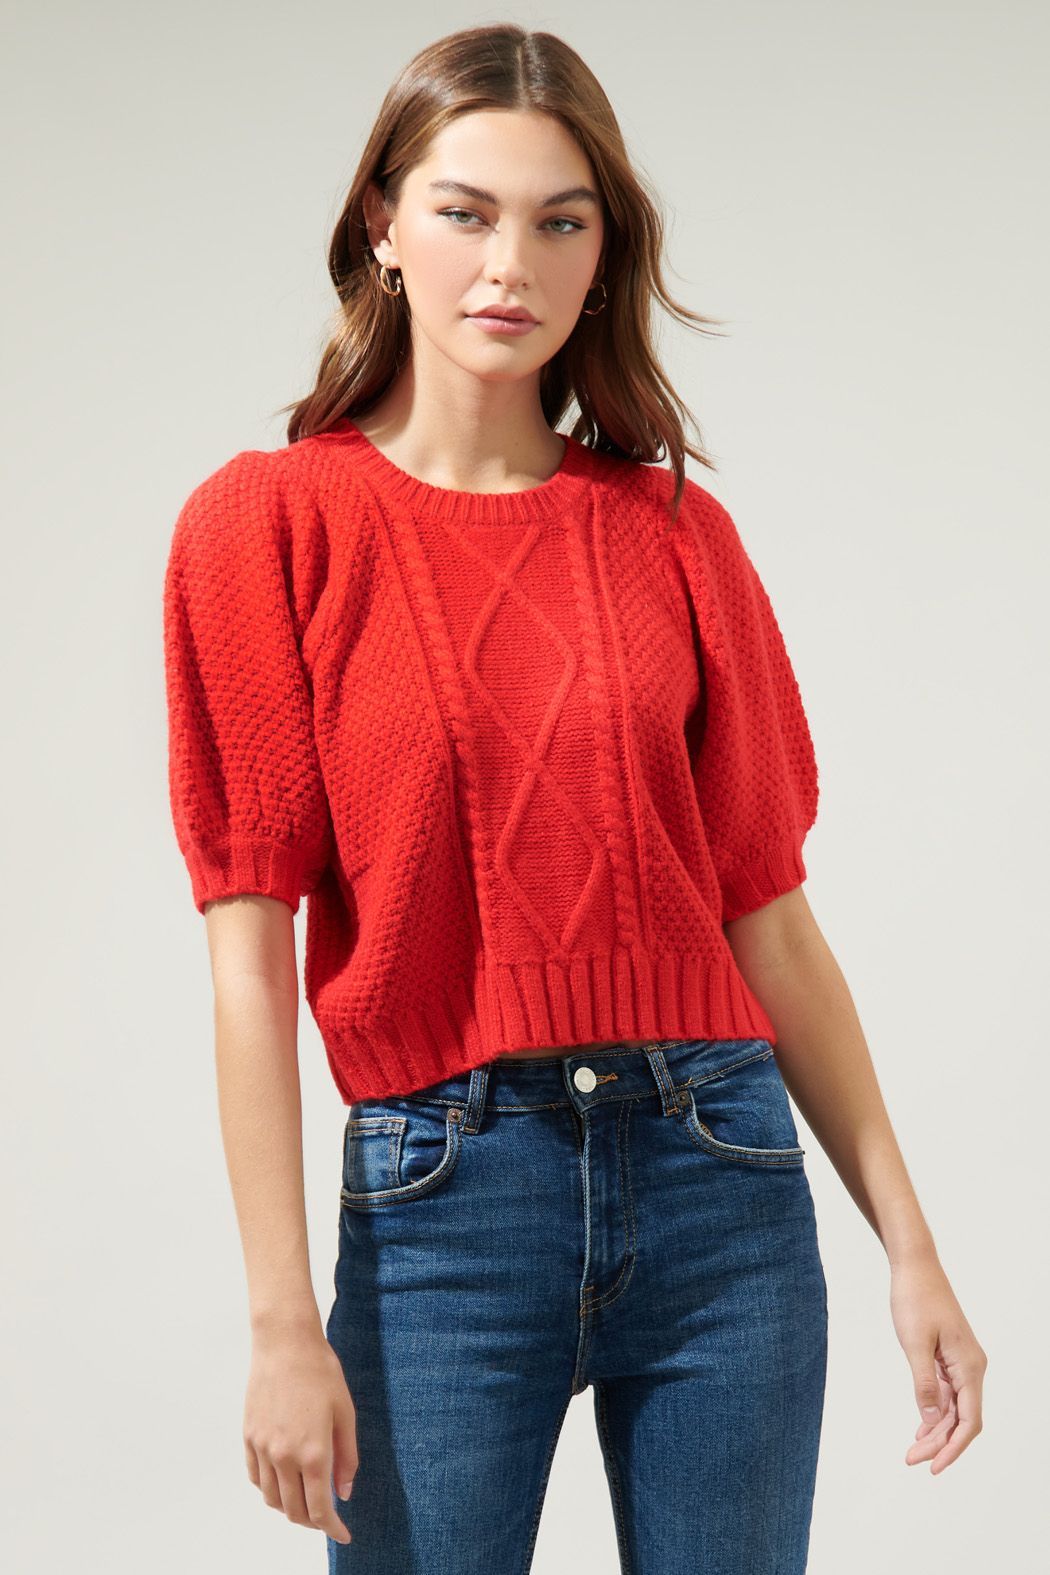 Sugar Lips | Red Cable Knit Top | Sweetest Stitch Online Boutique